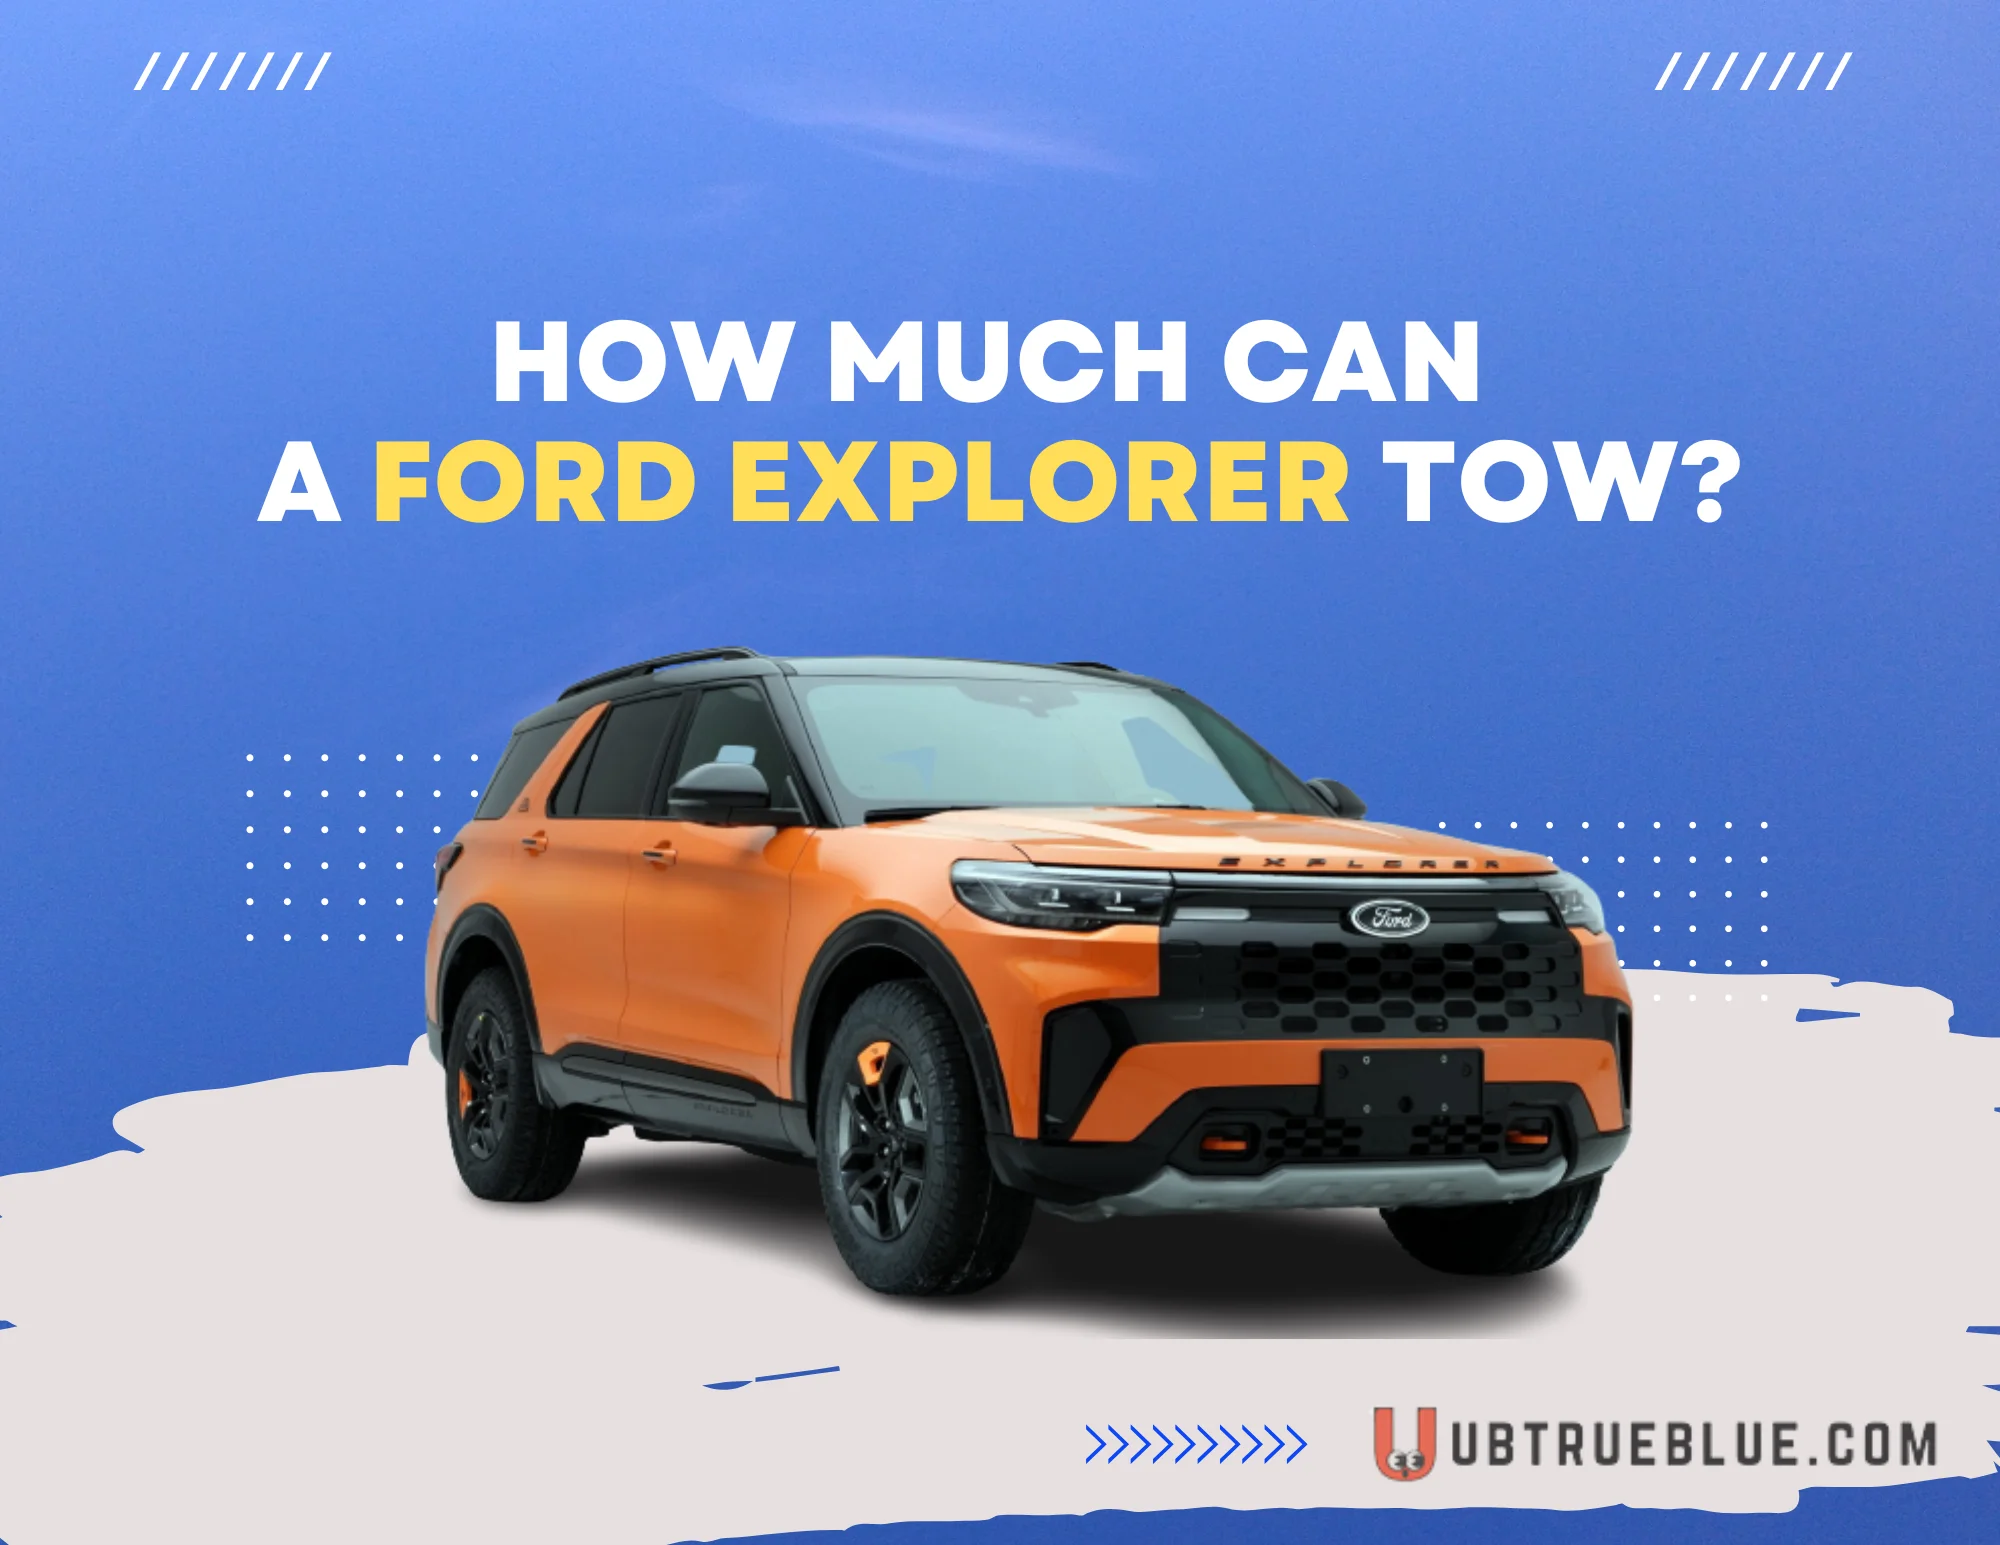 How Much Can A Ford Explorer Tow On Ubtrueblue Automotive Tow? Trailblazer's Guide 2022 Hybrid Xlt 2023 Towing Problems  Full